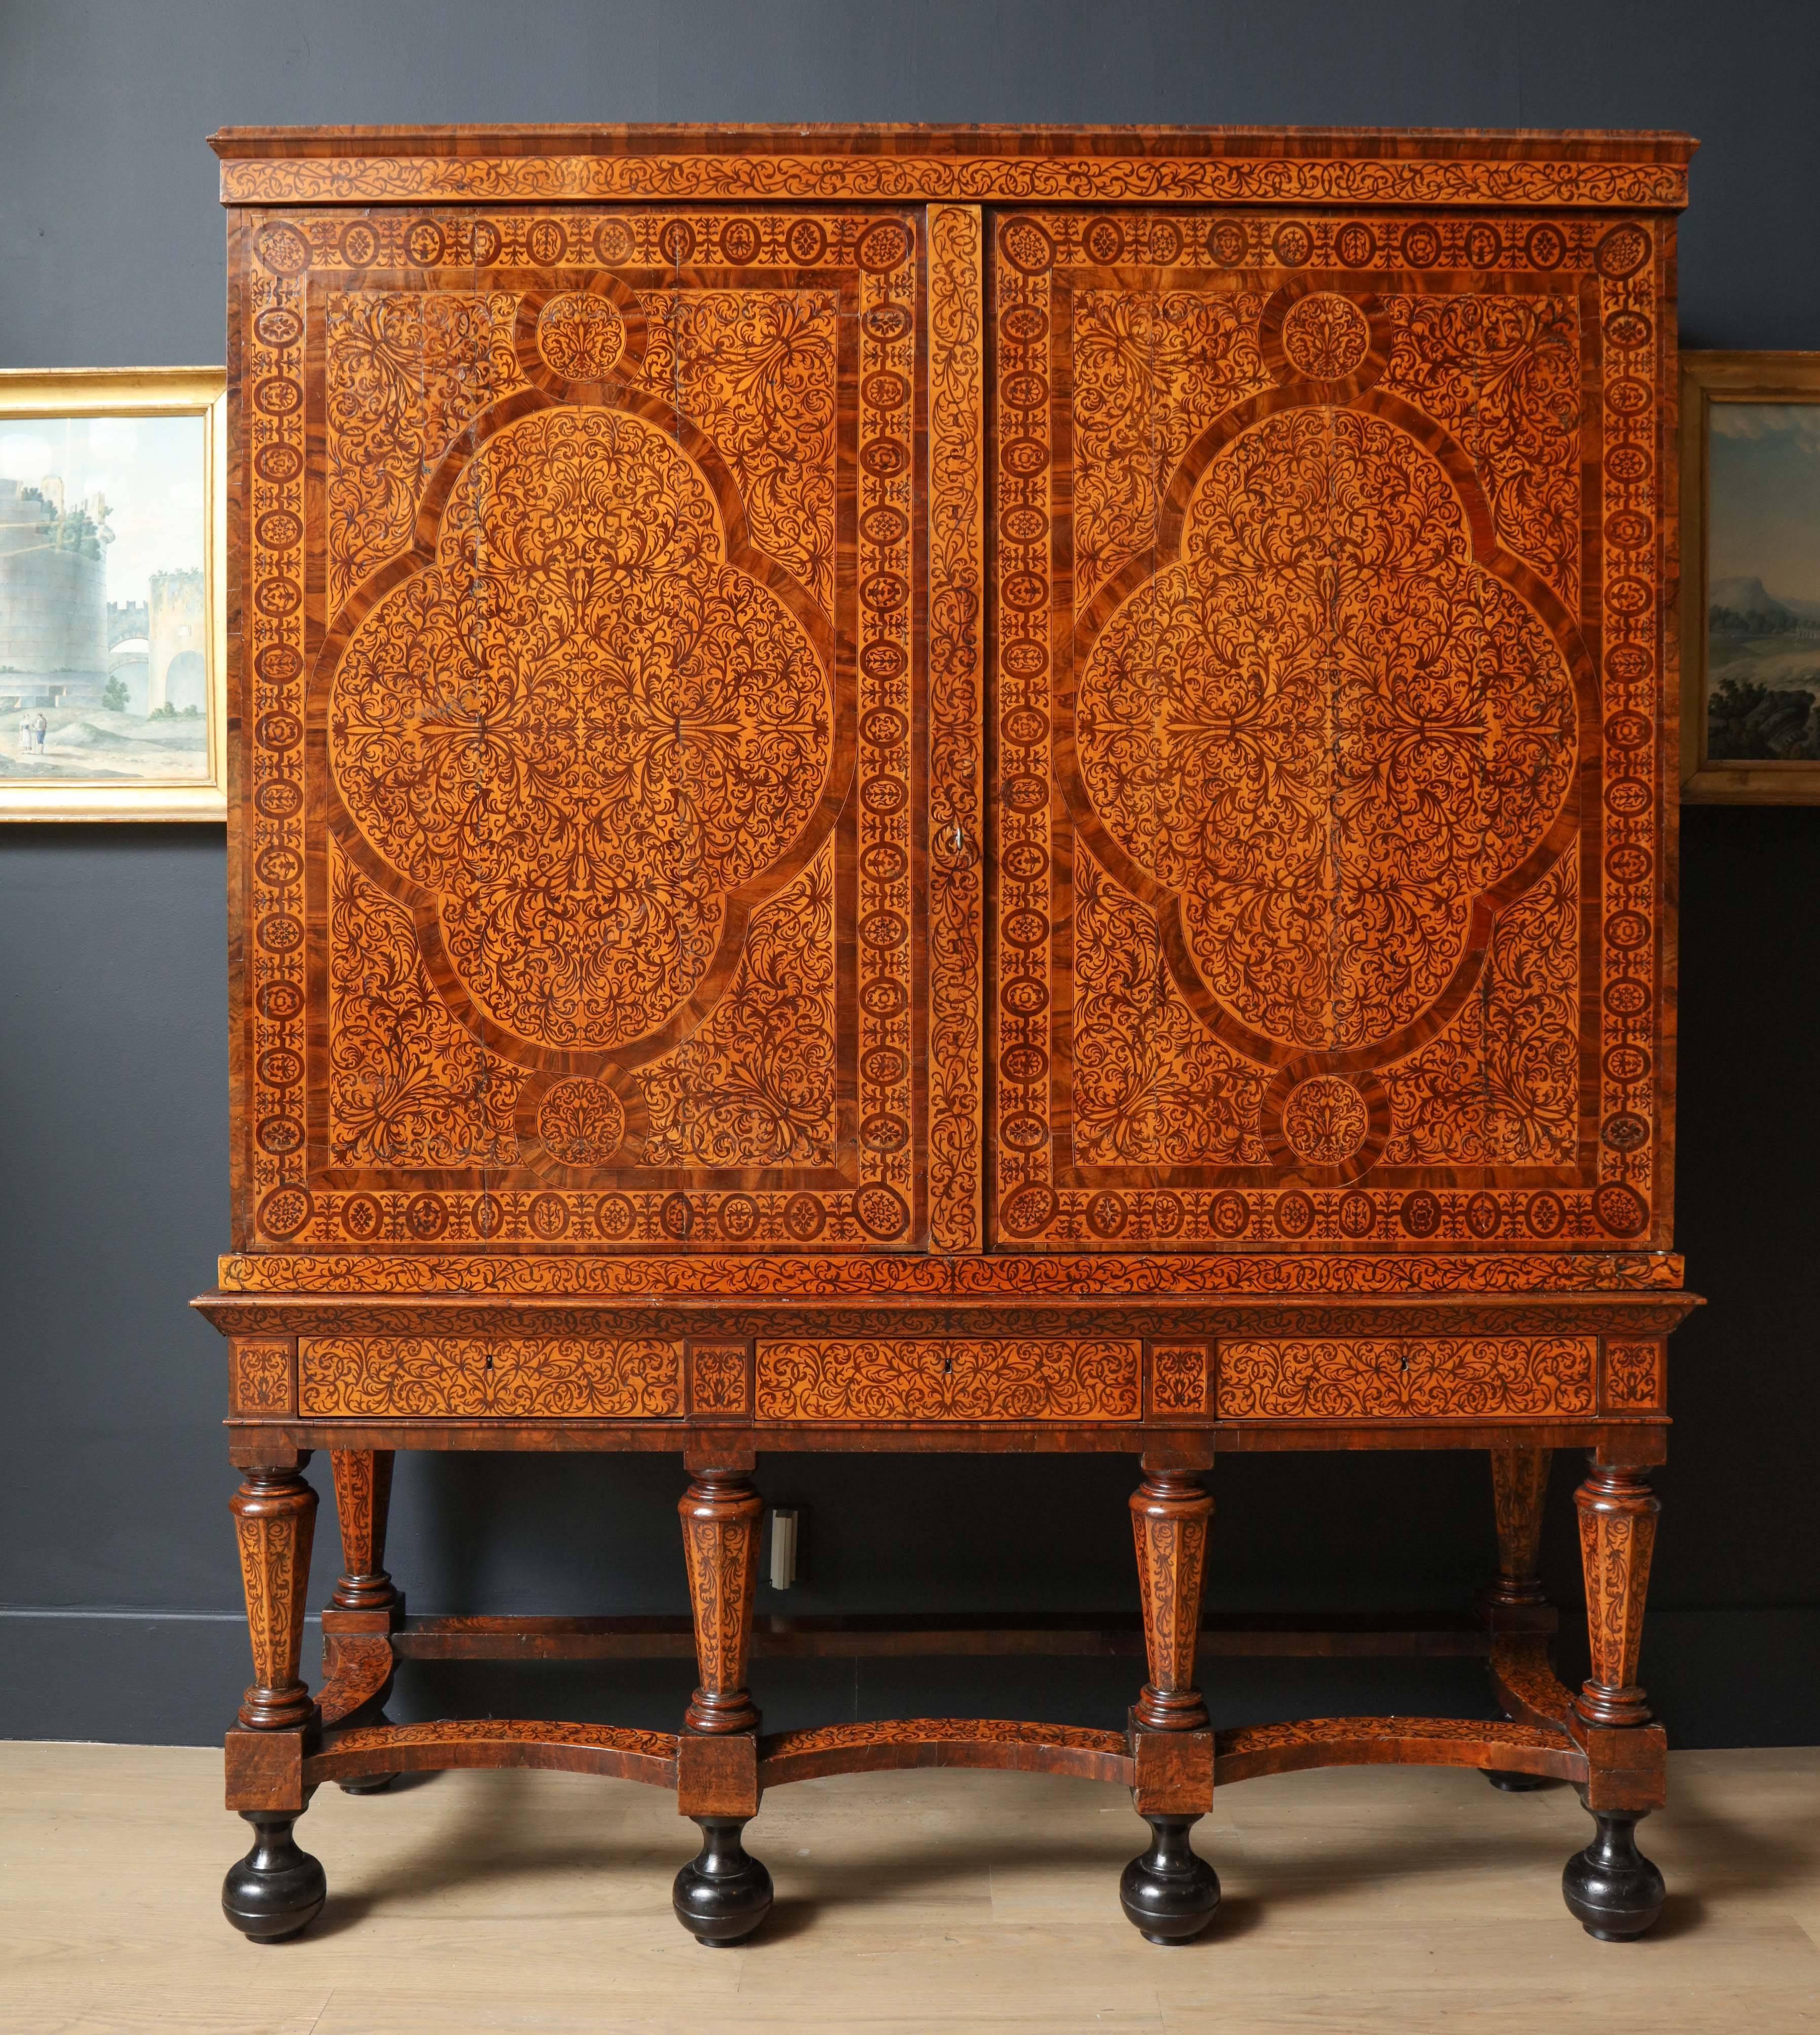 Inlaid throughout with intricate scroll patterns with large decorative cartouches on all sides of the cabinet with flat cornice raised on a stand of octagonal tapering legs and ebonized bun feet. Fitted with drawers and shelves inside.

Produced